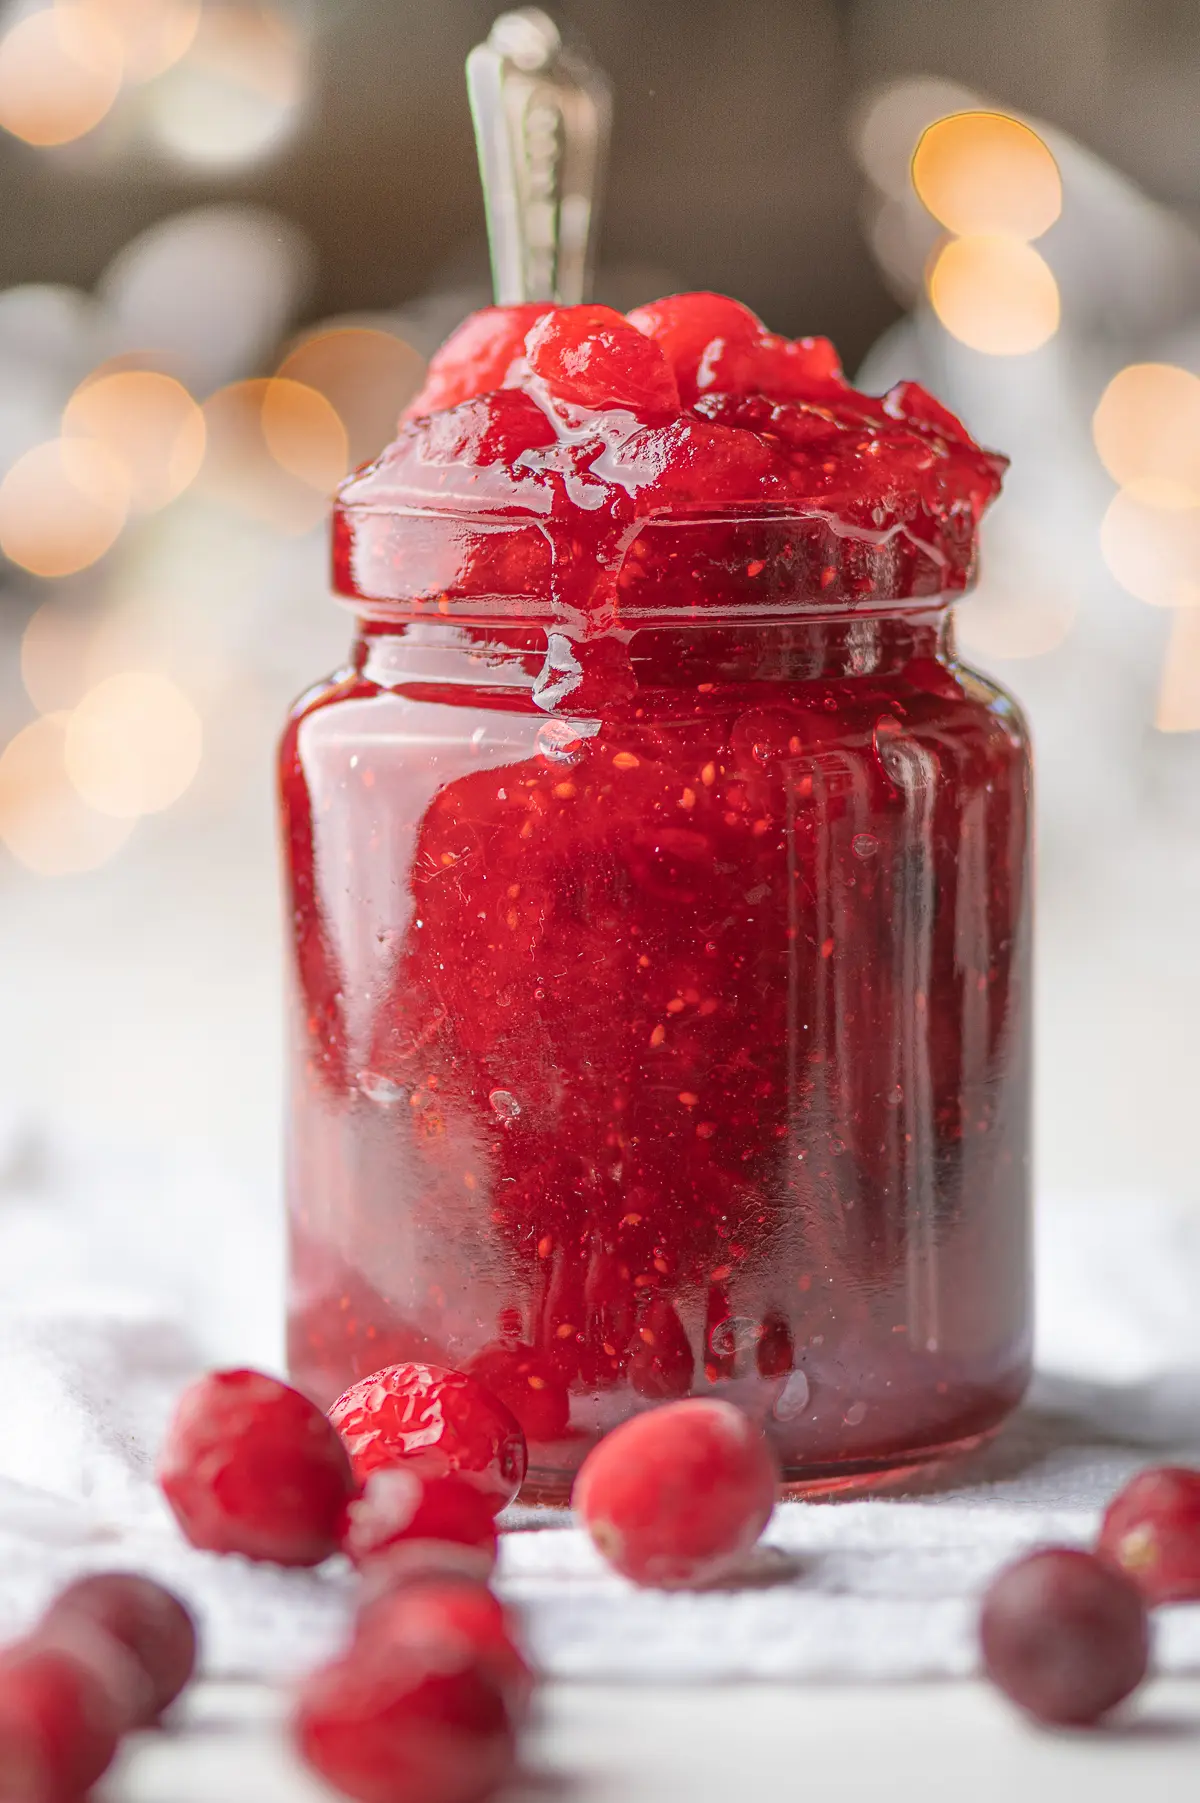 A jar filled with bright red cranberry jelly with scattered cranberries around the base of the jar.  In the background there are blurred out Christmas lights